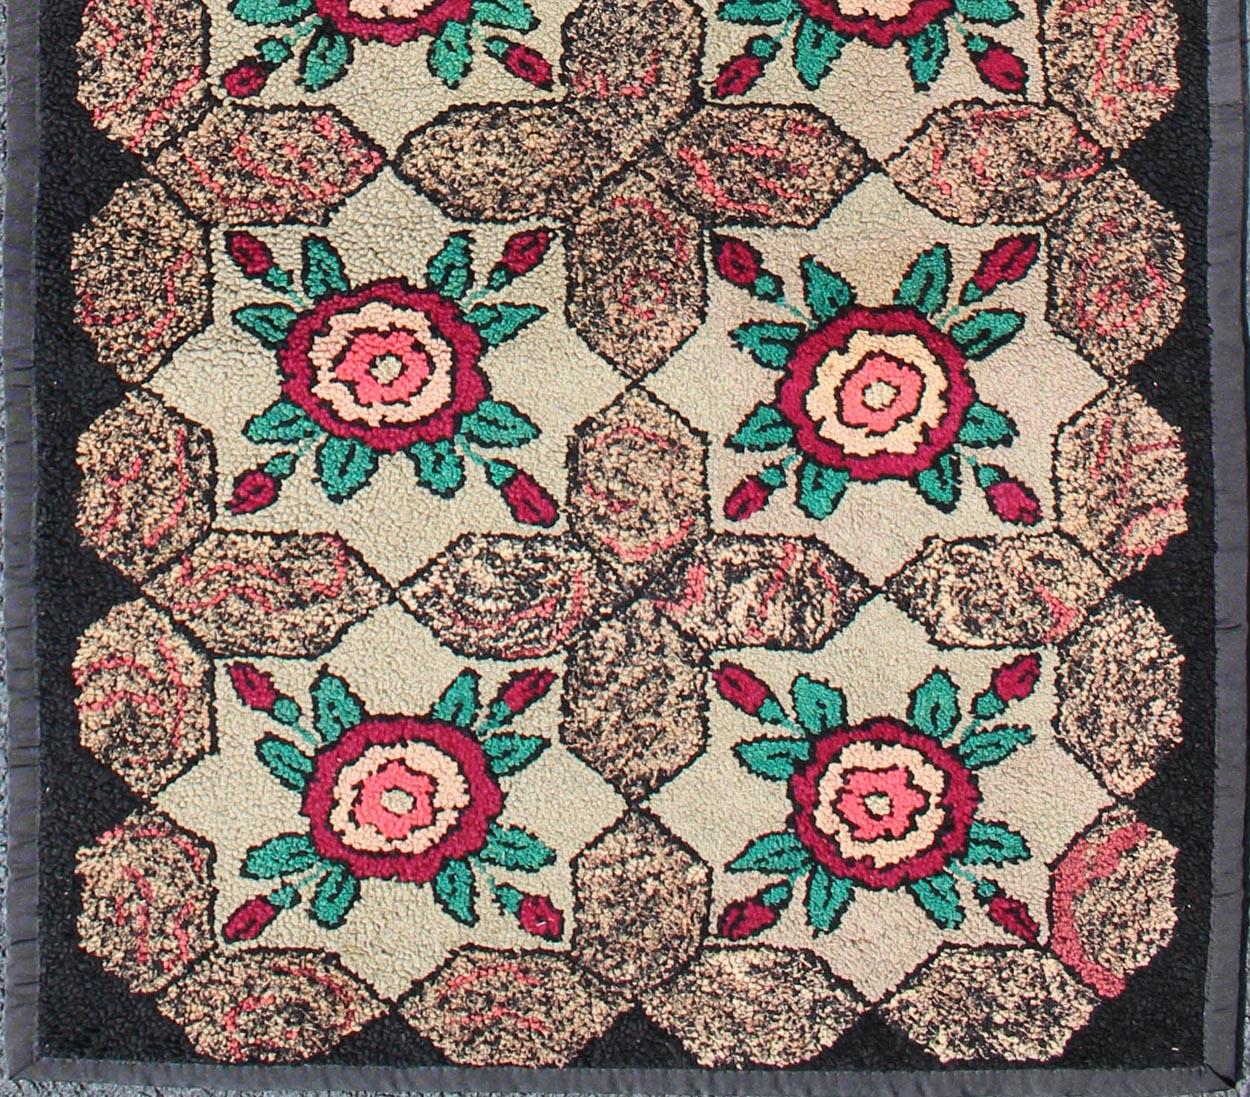 American Colonial Repeating Floral-Leaf Design American Hooked Rug in Brown, Green, and Red For Sale